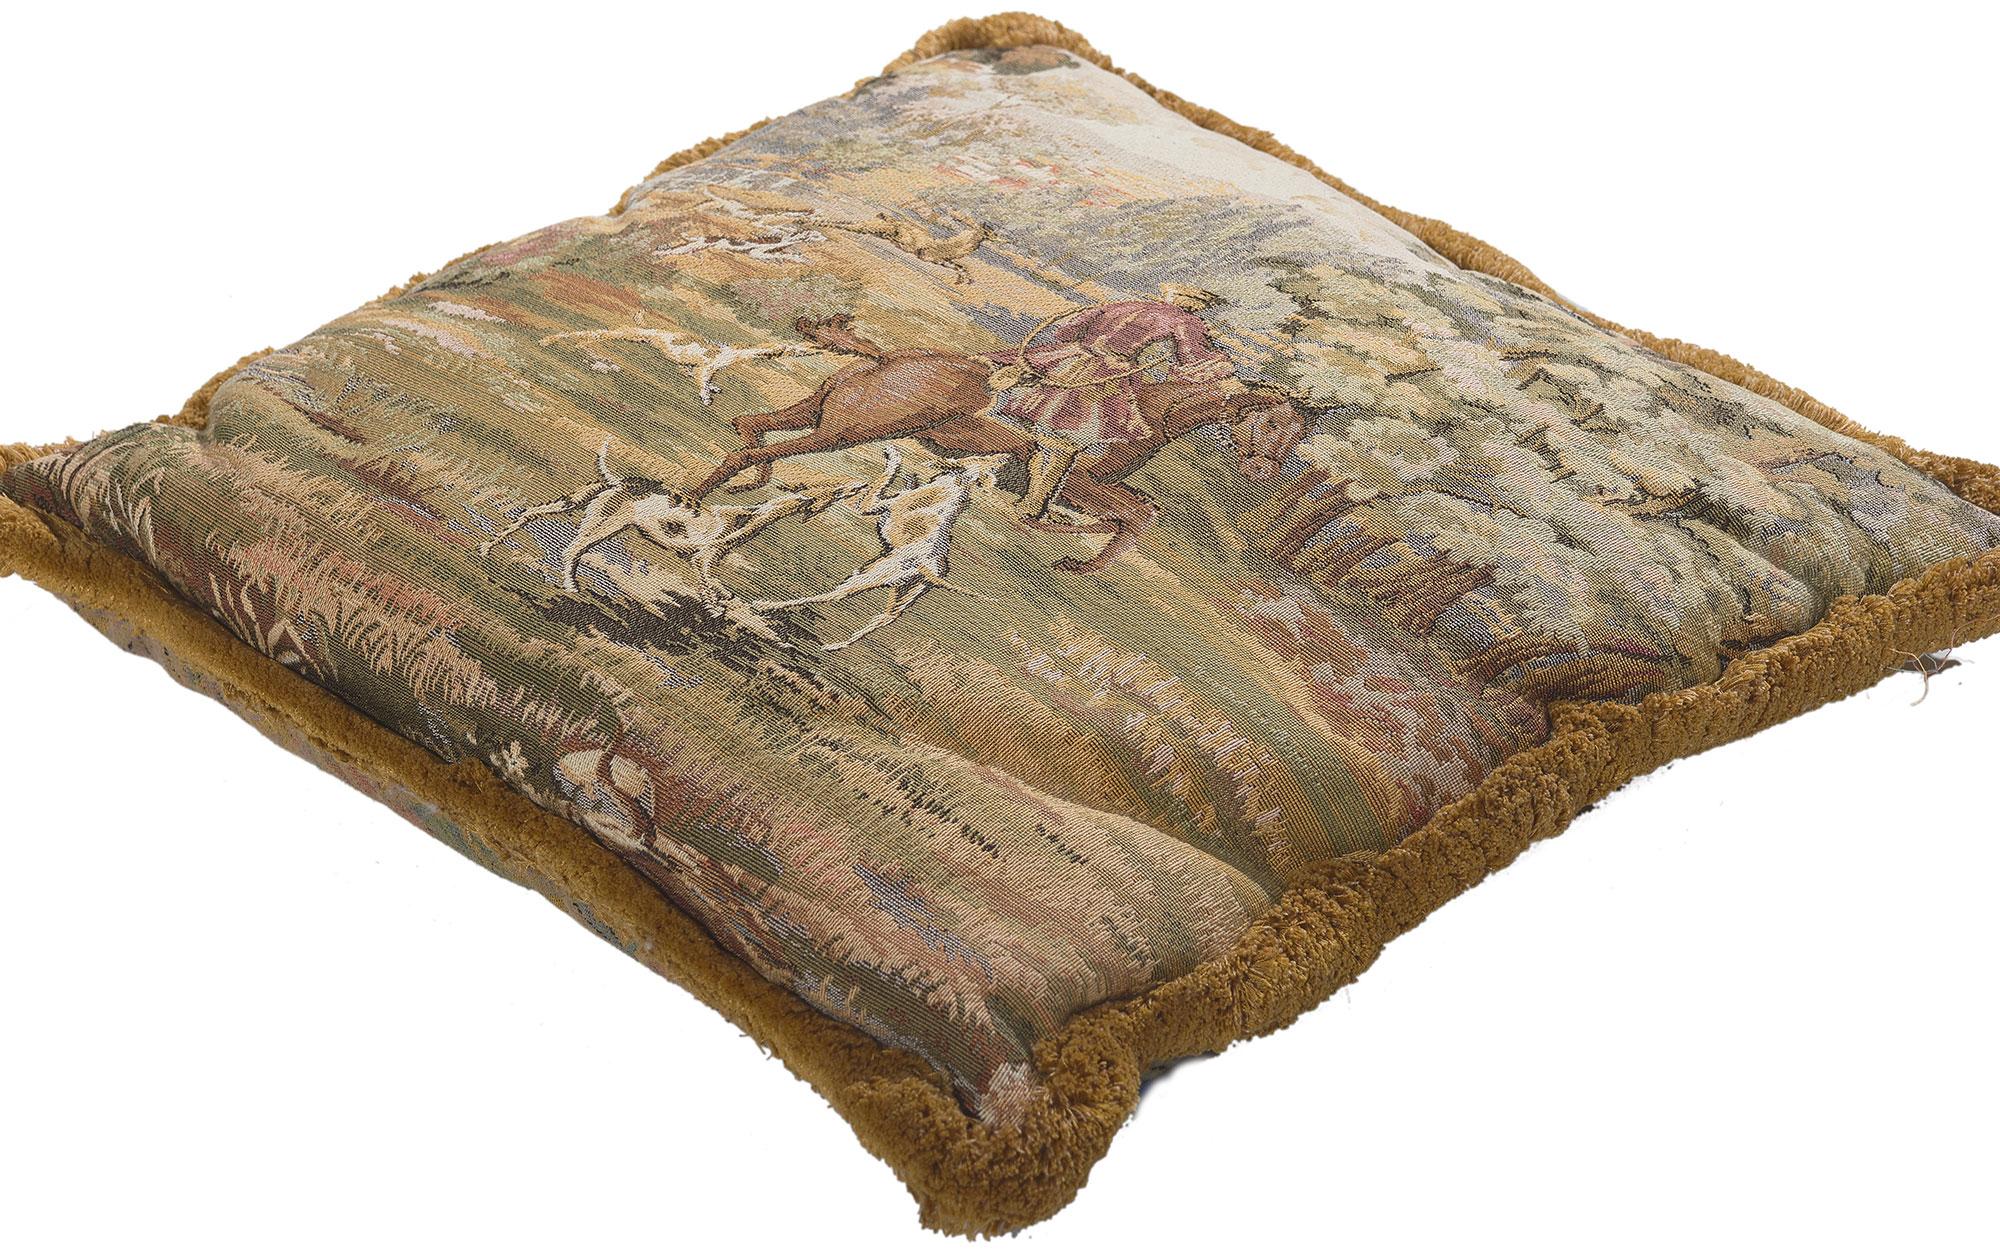 78618 Decorative Vintage Tapestry Pillow, 01'05 x 01'05. 
Emanating timeless style of Louis XV with incredible detail and texture, this decorative vintage tapestry pillow is a captivating vision of woven beauty. The Louis XV royal hunting scene and